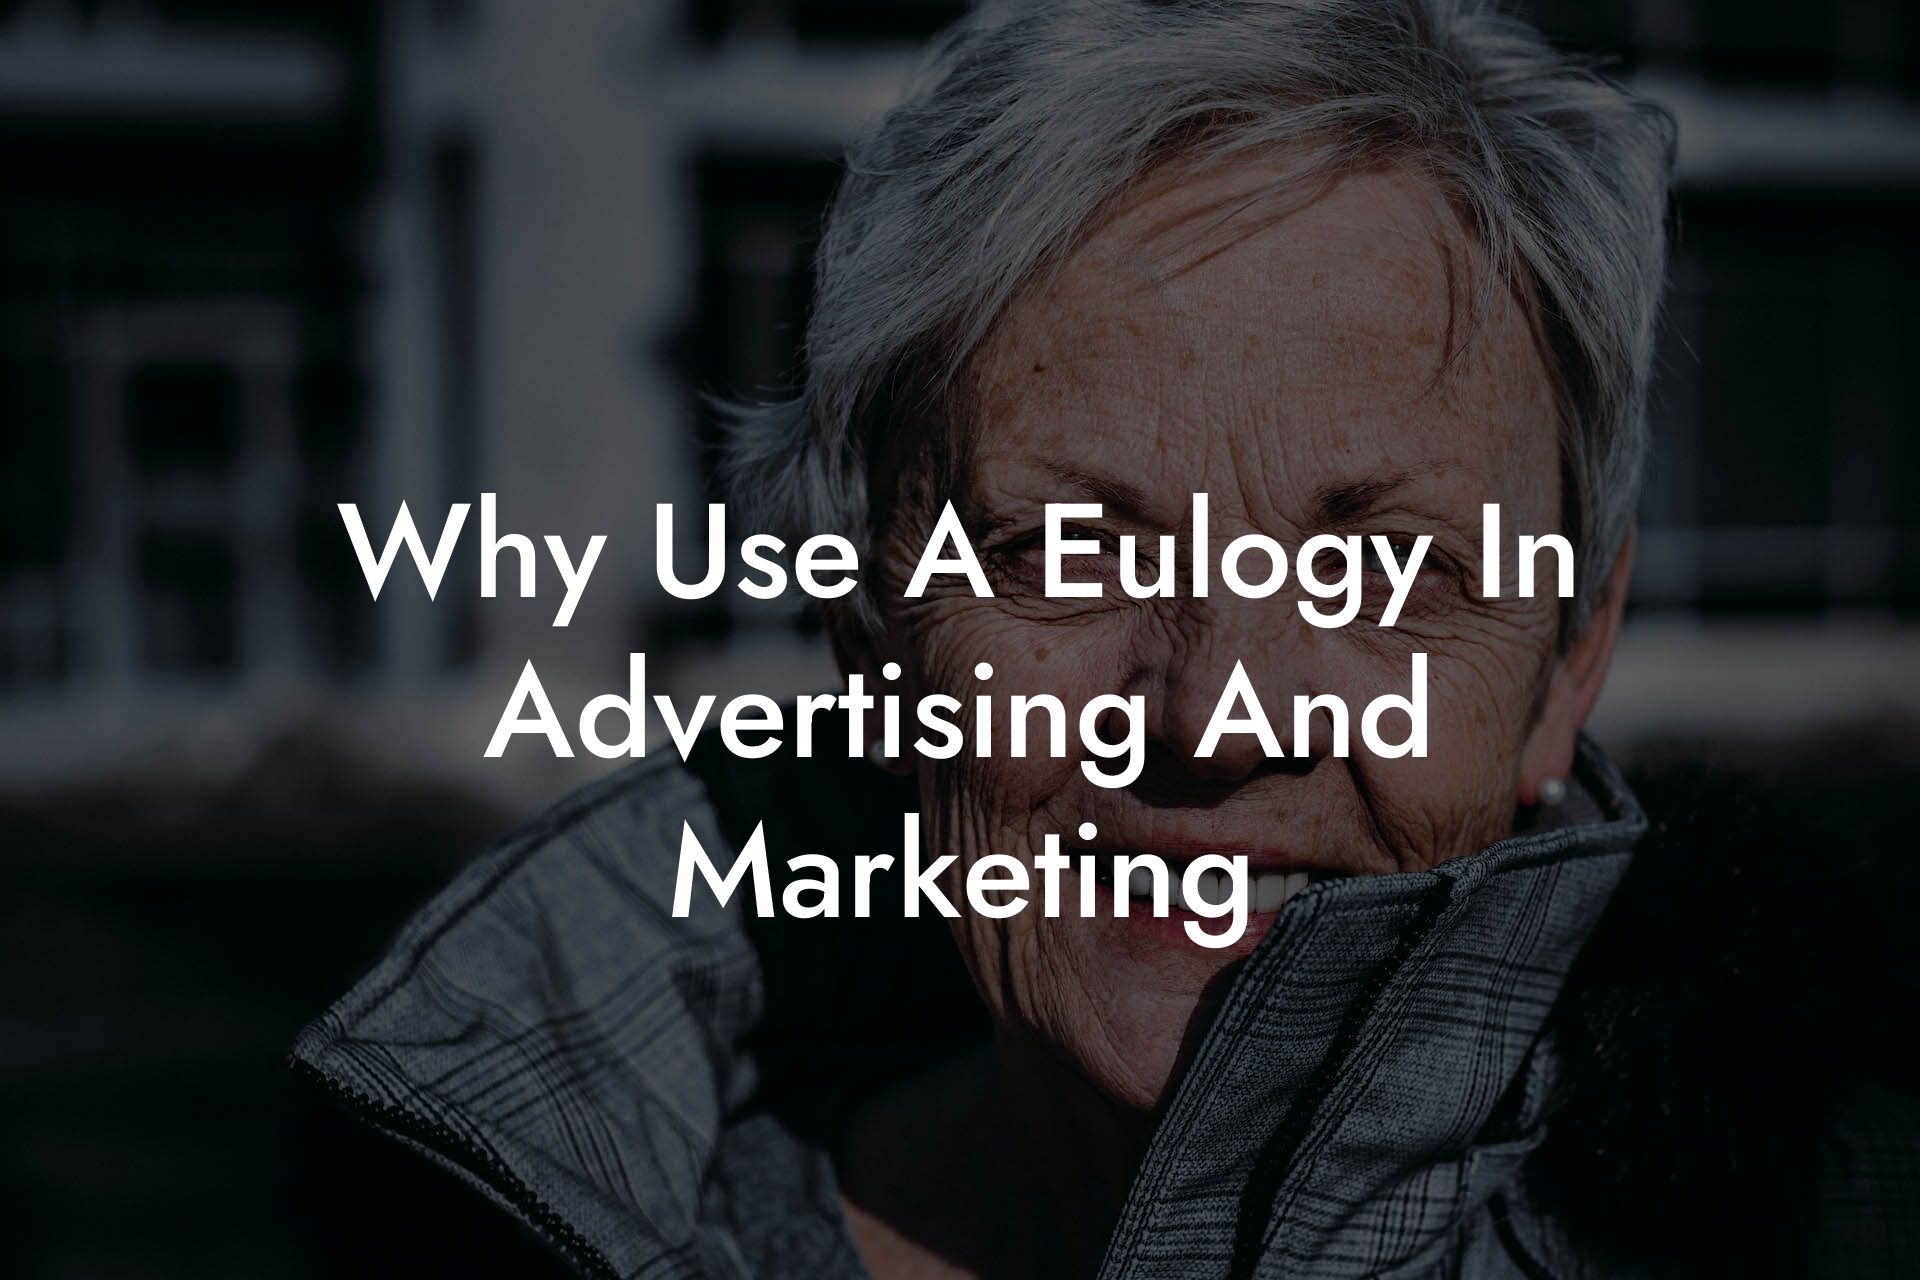 Why Use A Eulogy In Advertising And Marketing